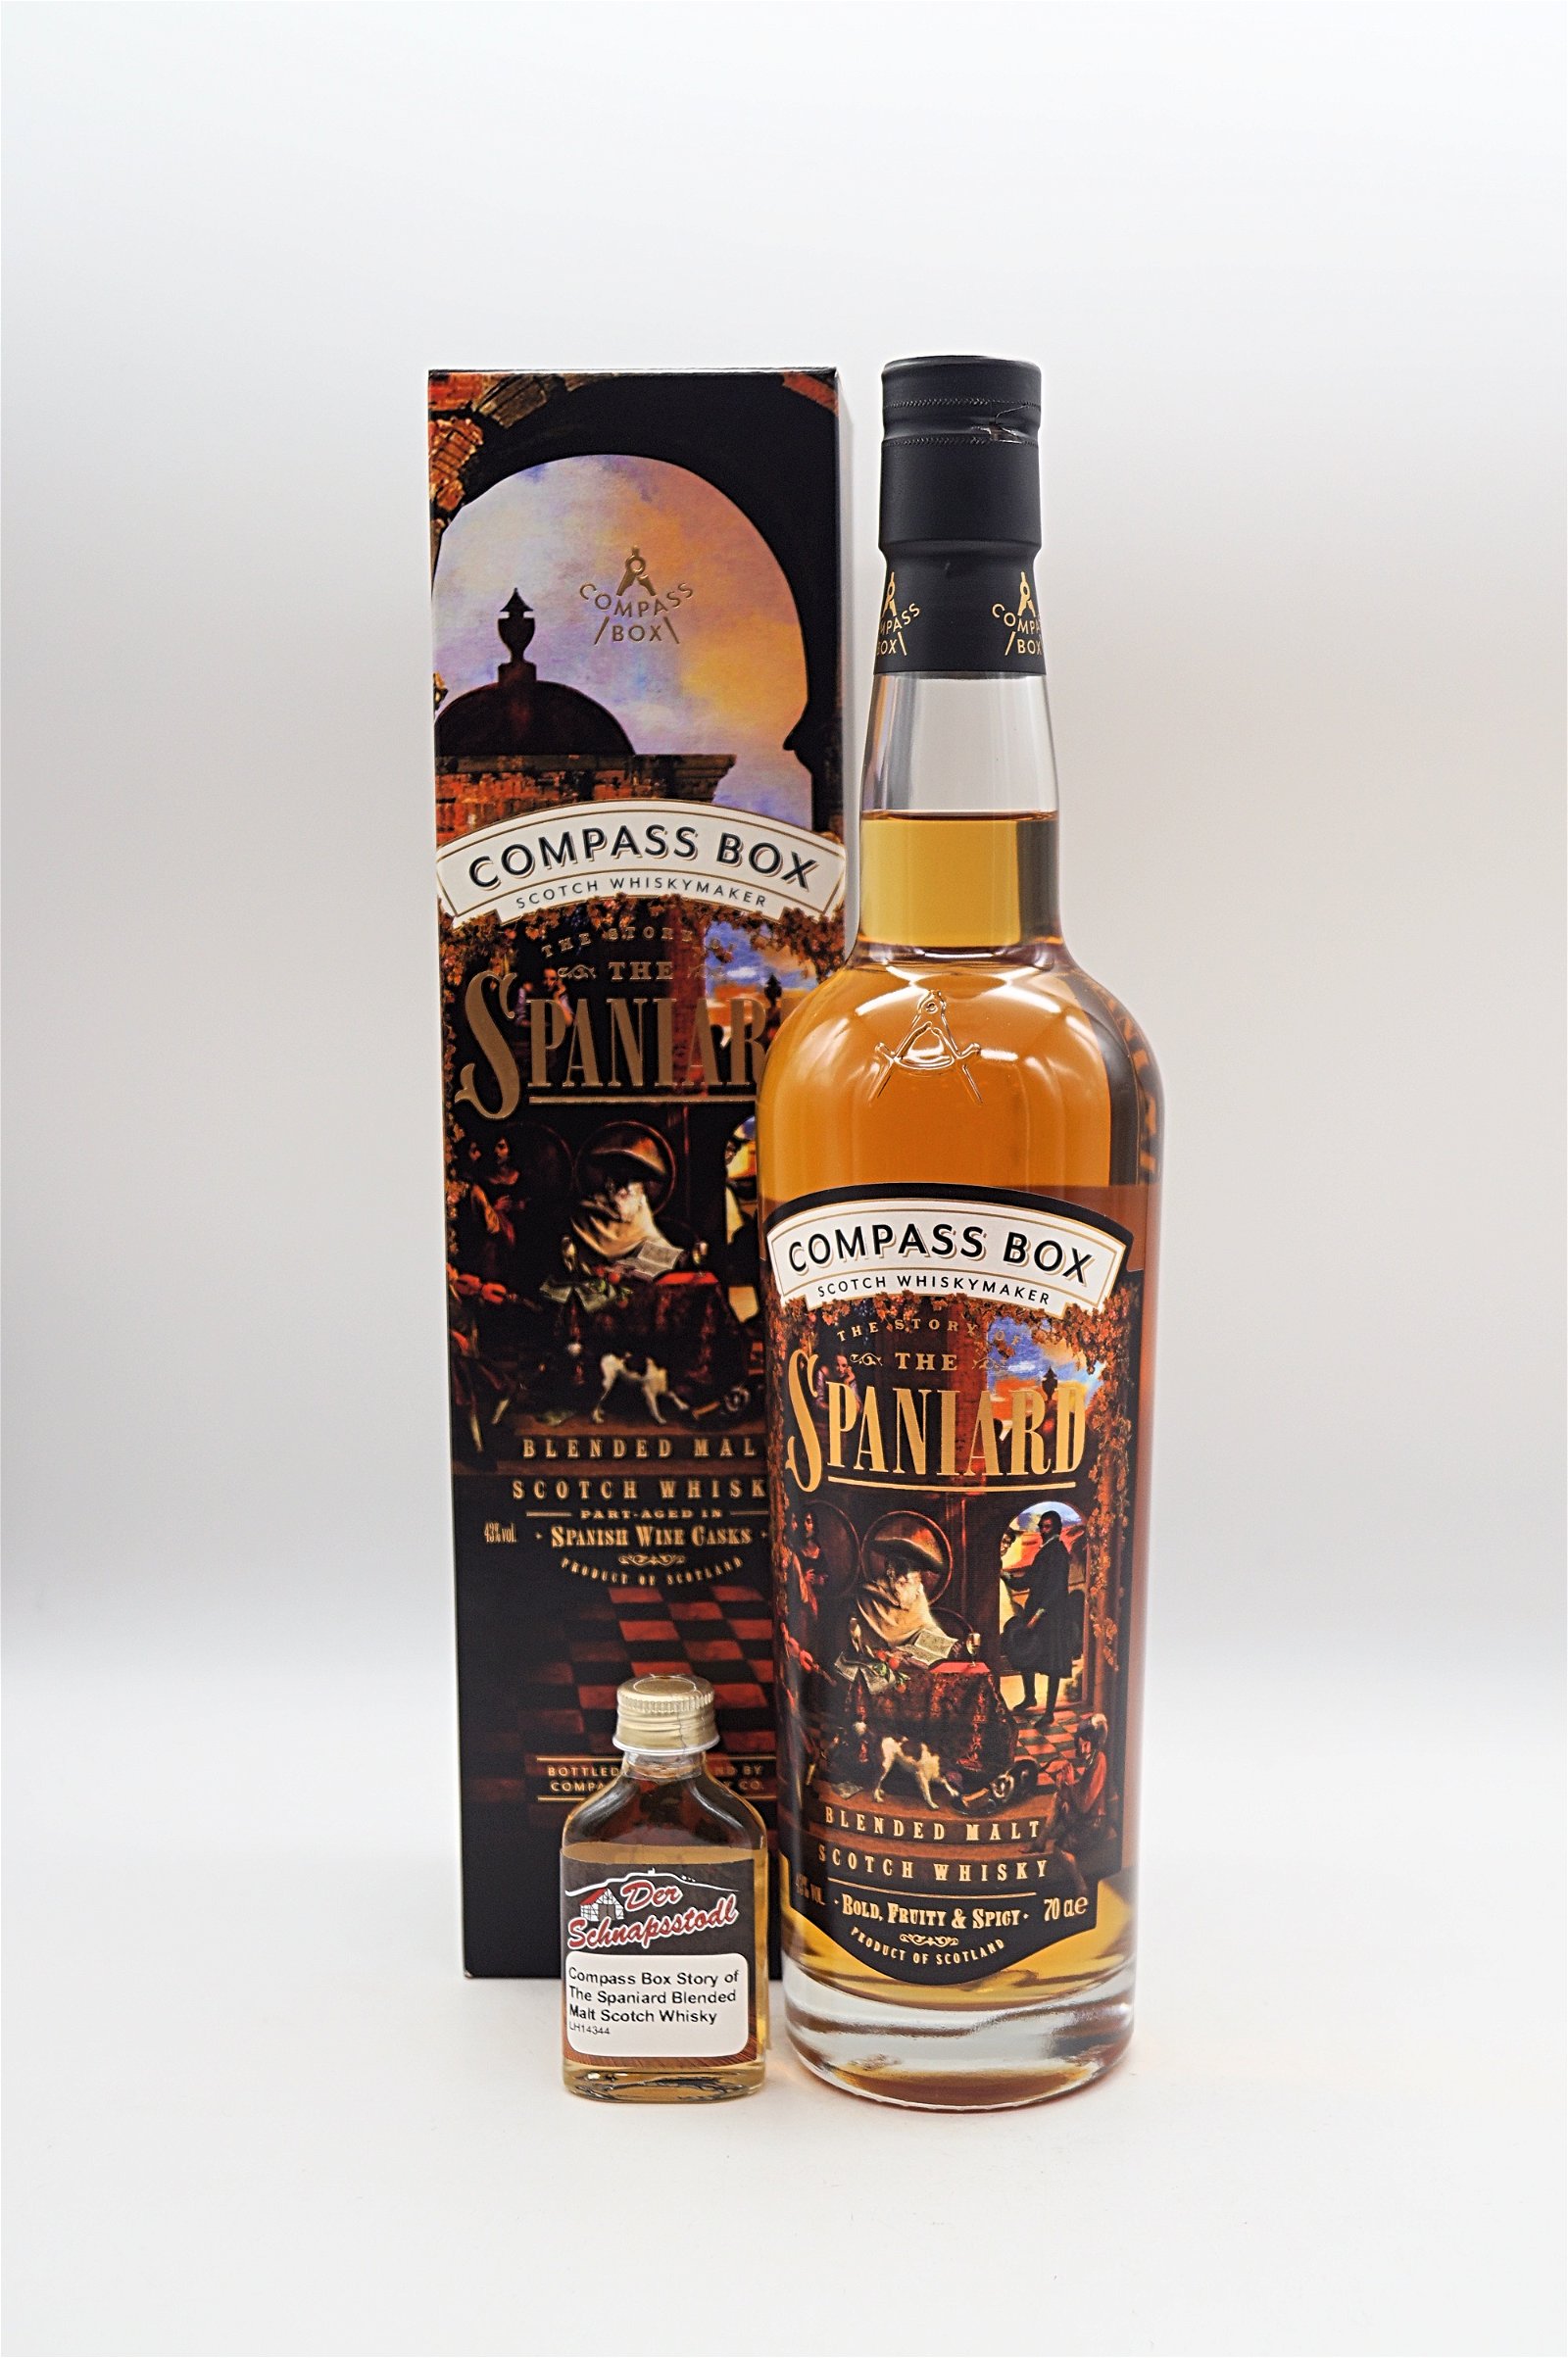 Compass Box The Story of the Spaniard Blended Malt Scotch Whisky Sample 20 ml